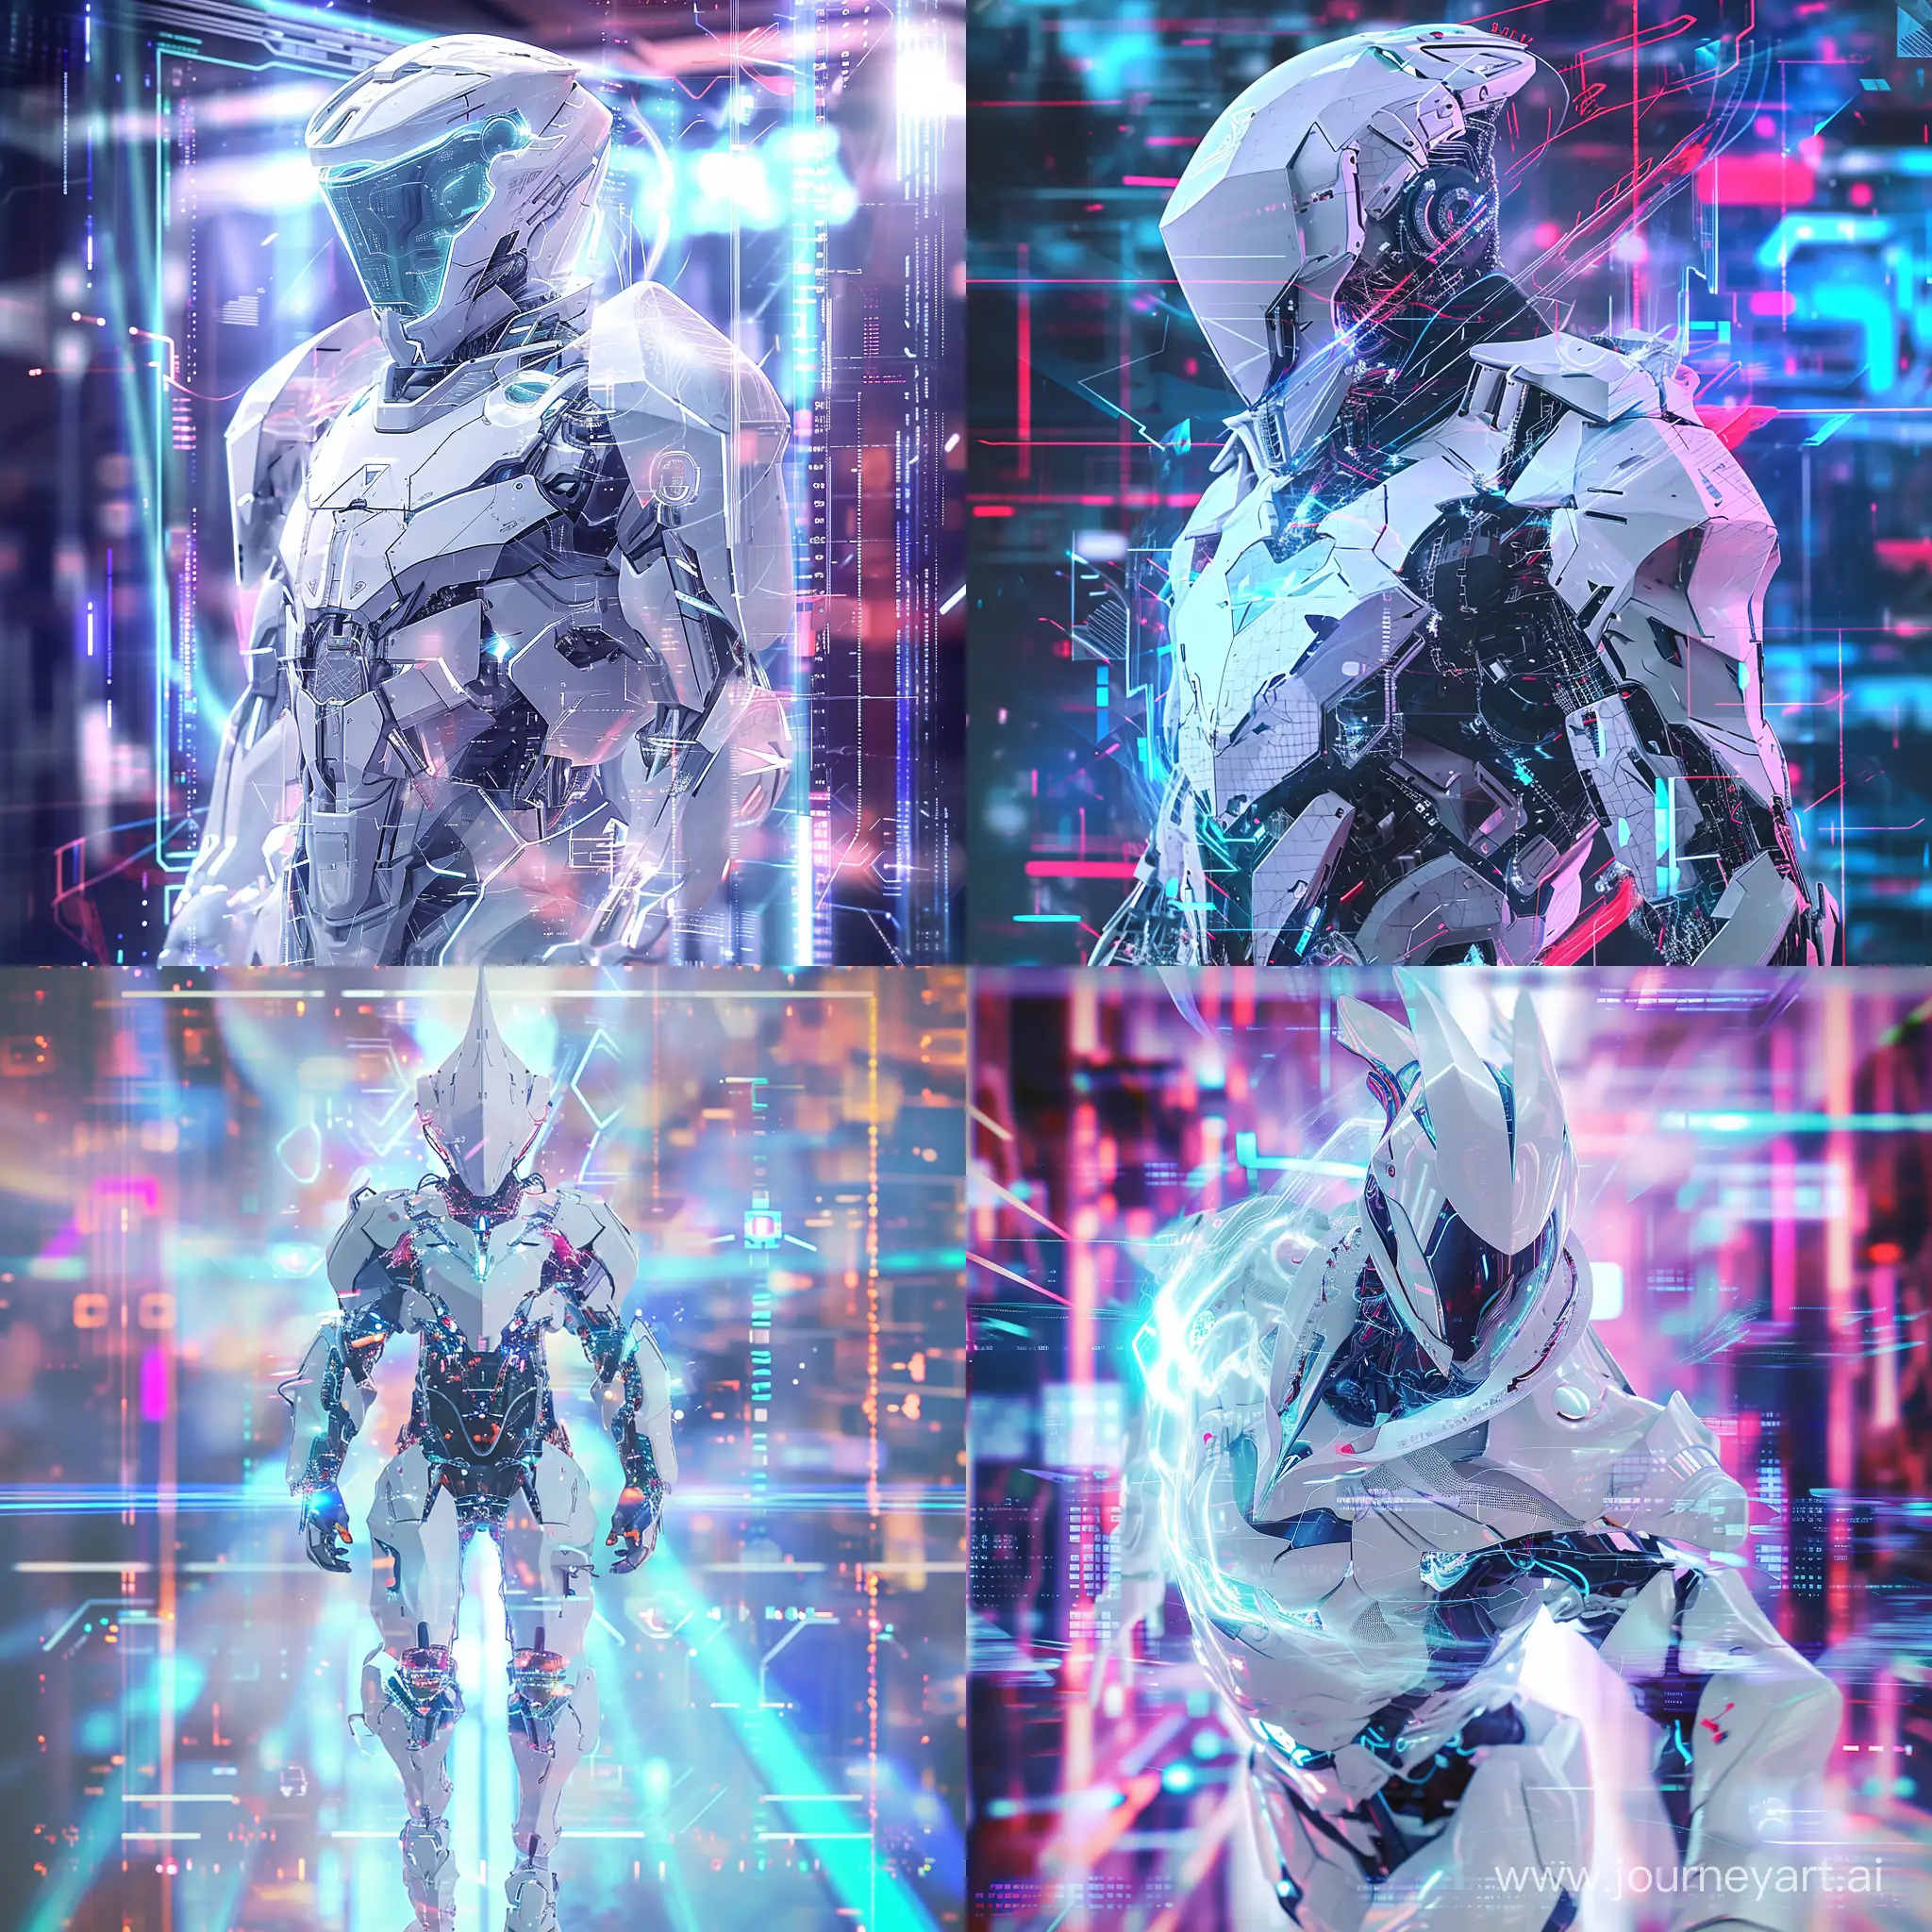 Subject: The main subject of the image is a holographic representation of a cybernetic white knight, emphasizing a futuristic and technologically advanced theme. The hologram is the focal point, creating a visually striking centerpiece. Setting: The setting is a sci-fi environment, characterized by sleek and minimalist design elements. The use of advanced technology is evident, with holographic projections contributing to the futuristic atmosphere. The color palette likely includes cool tones to enhance the high- tech ambiance. Background: The background is carefully chosen
to complement the sci-fi theme, featuring intricate digital patterns or abstract shapes. These elements contribute to the overall sense of immersion and convey a sense of the digital realm. Style: The style of the image is characterized by a blend of cyberpunk aesthetics and futuristic elements. The cybernetic white knight is likely to have sleek, angular designs, giving it a cutting- edge and modern appearance. Coloring: The color scheme leans towards a palette dominated by blues, purples, and silvers to convey a sense of technological sophistication. Neon accents may be used to add vibrancy and highlight key elements. Action: The holographic white knight may be depicted in a dynamic pose, suggesting readiness for action. This adds an element of excitement and energy to the image, engaging viewers and creating a sense of movement. --v 6